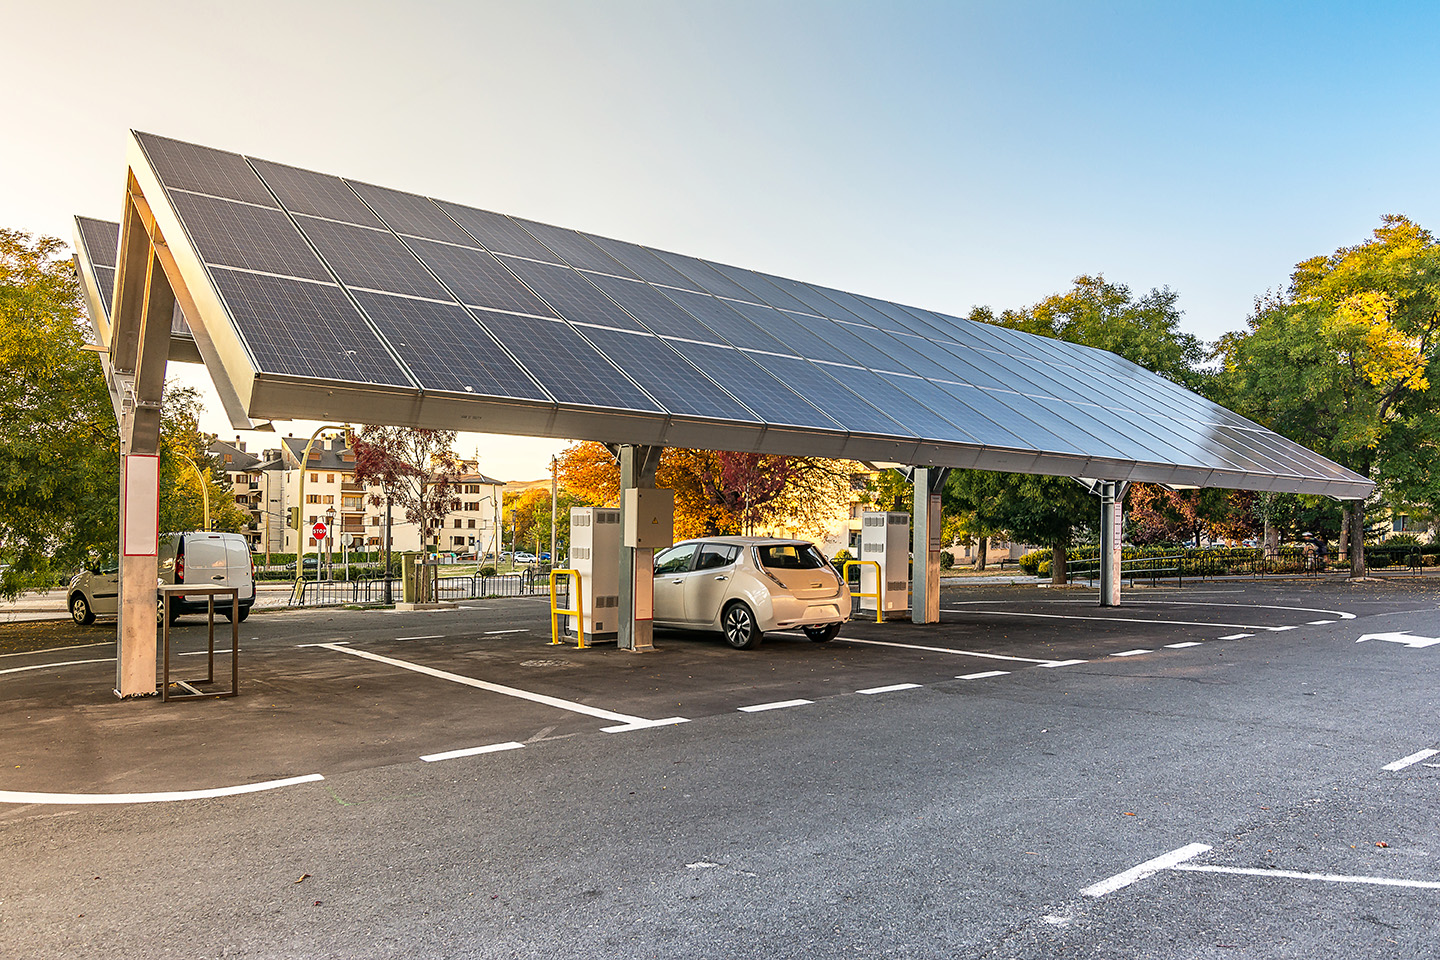 Car charging station for self-sufficient and first photovoltaic panels in Europe. It is also free. Located in La Granja de San Ildefonso (Segovia)